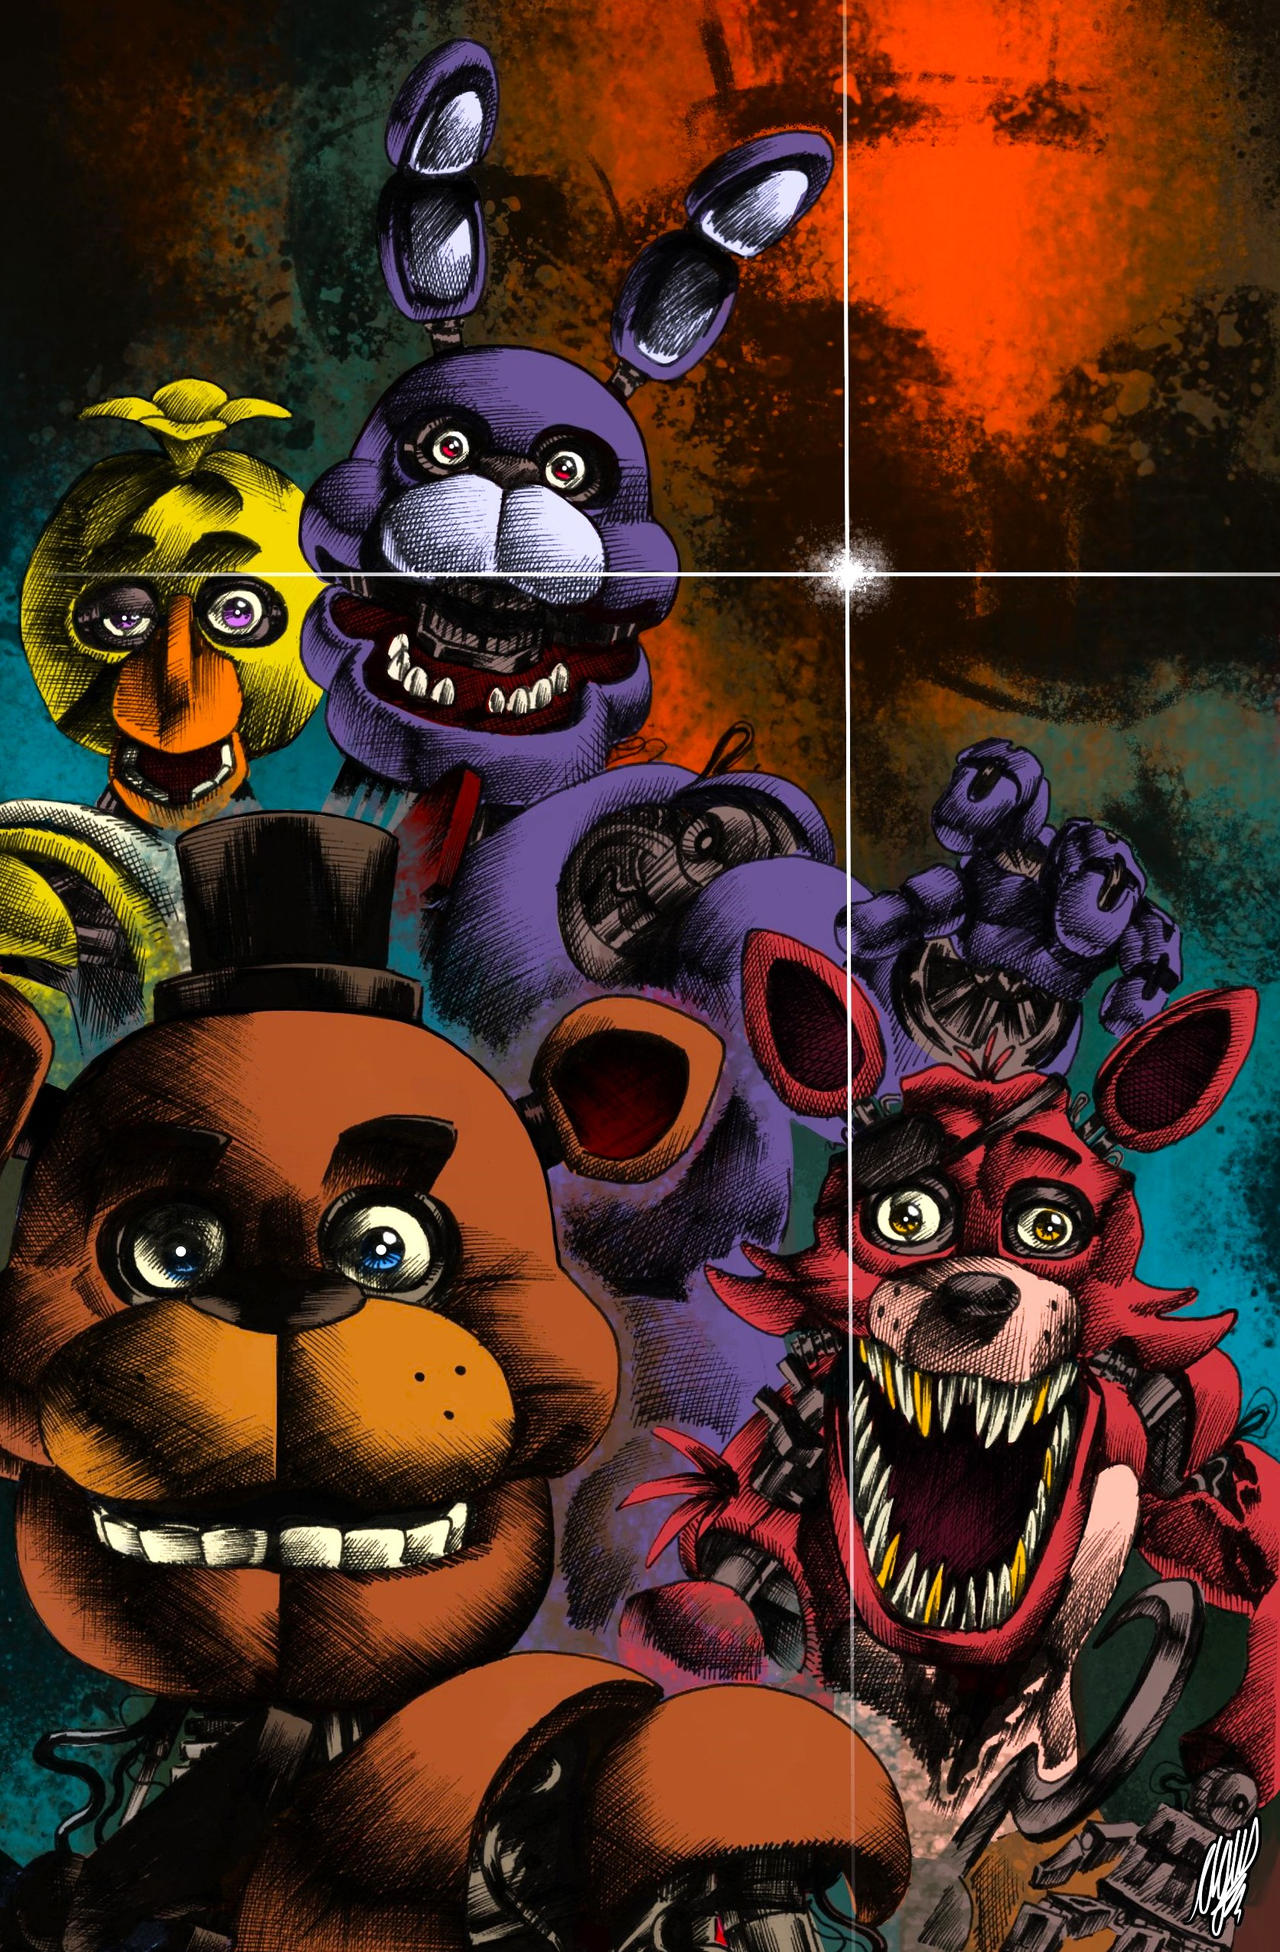 Five Nights at Freddy's review